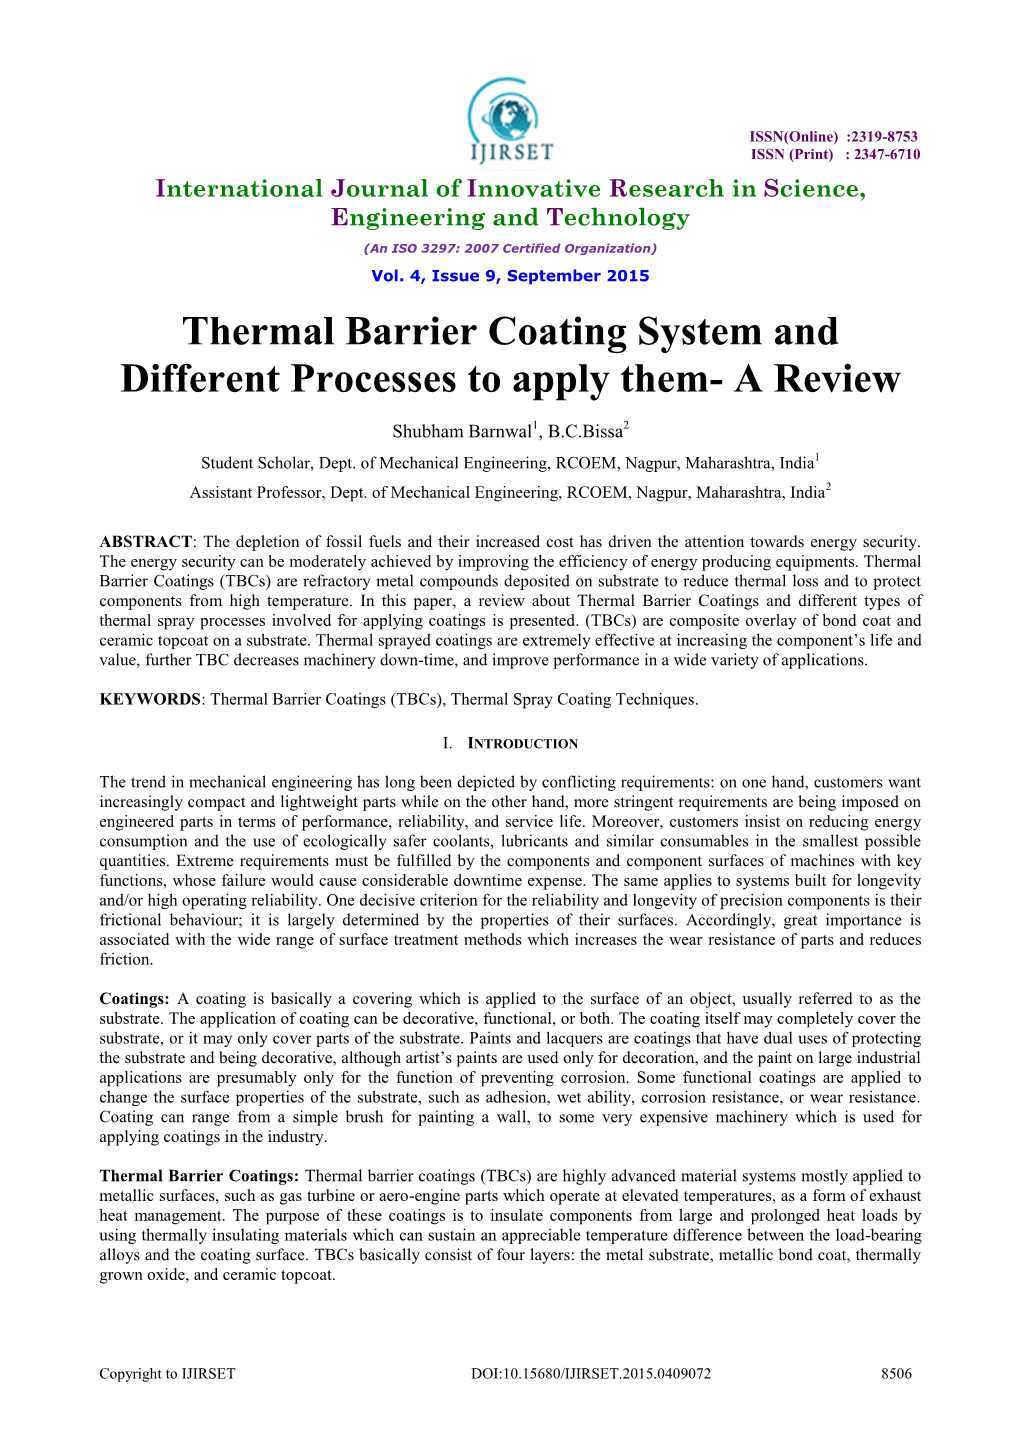 Thermal Barrier Coating System and Different Processes to Apply Them- a Review